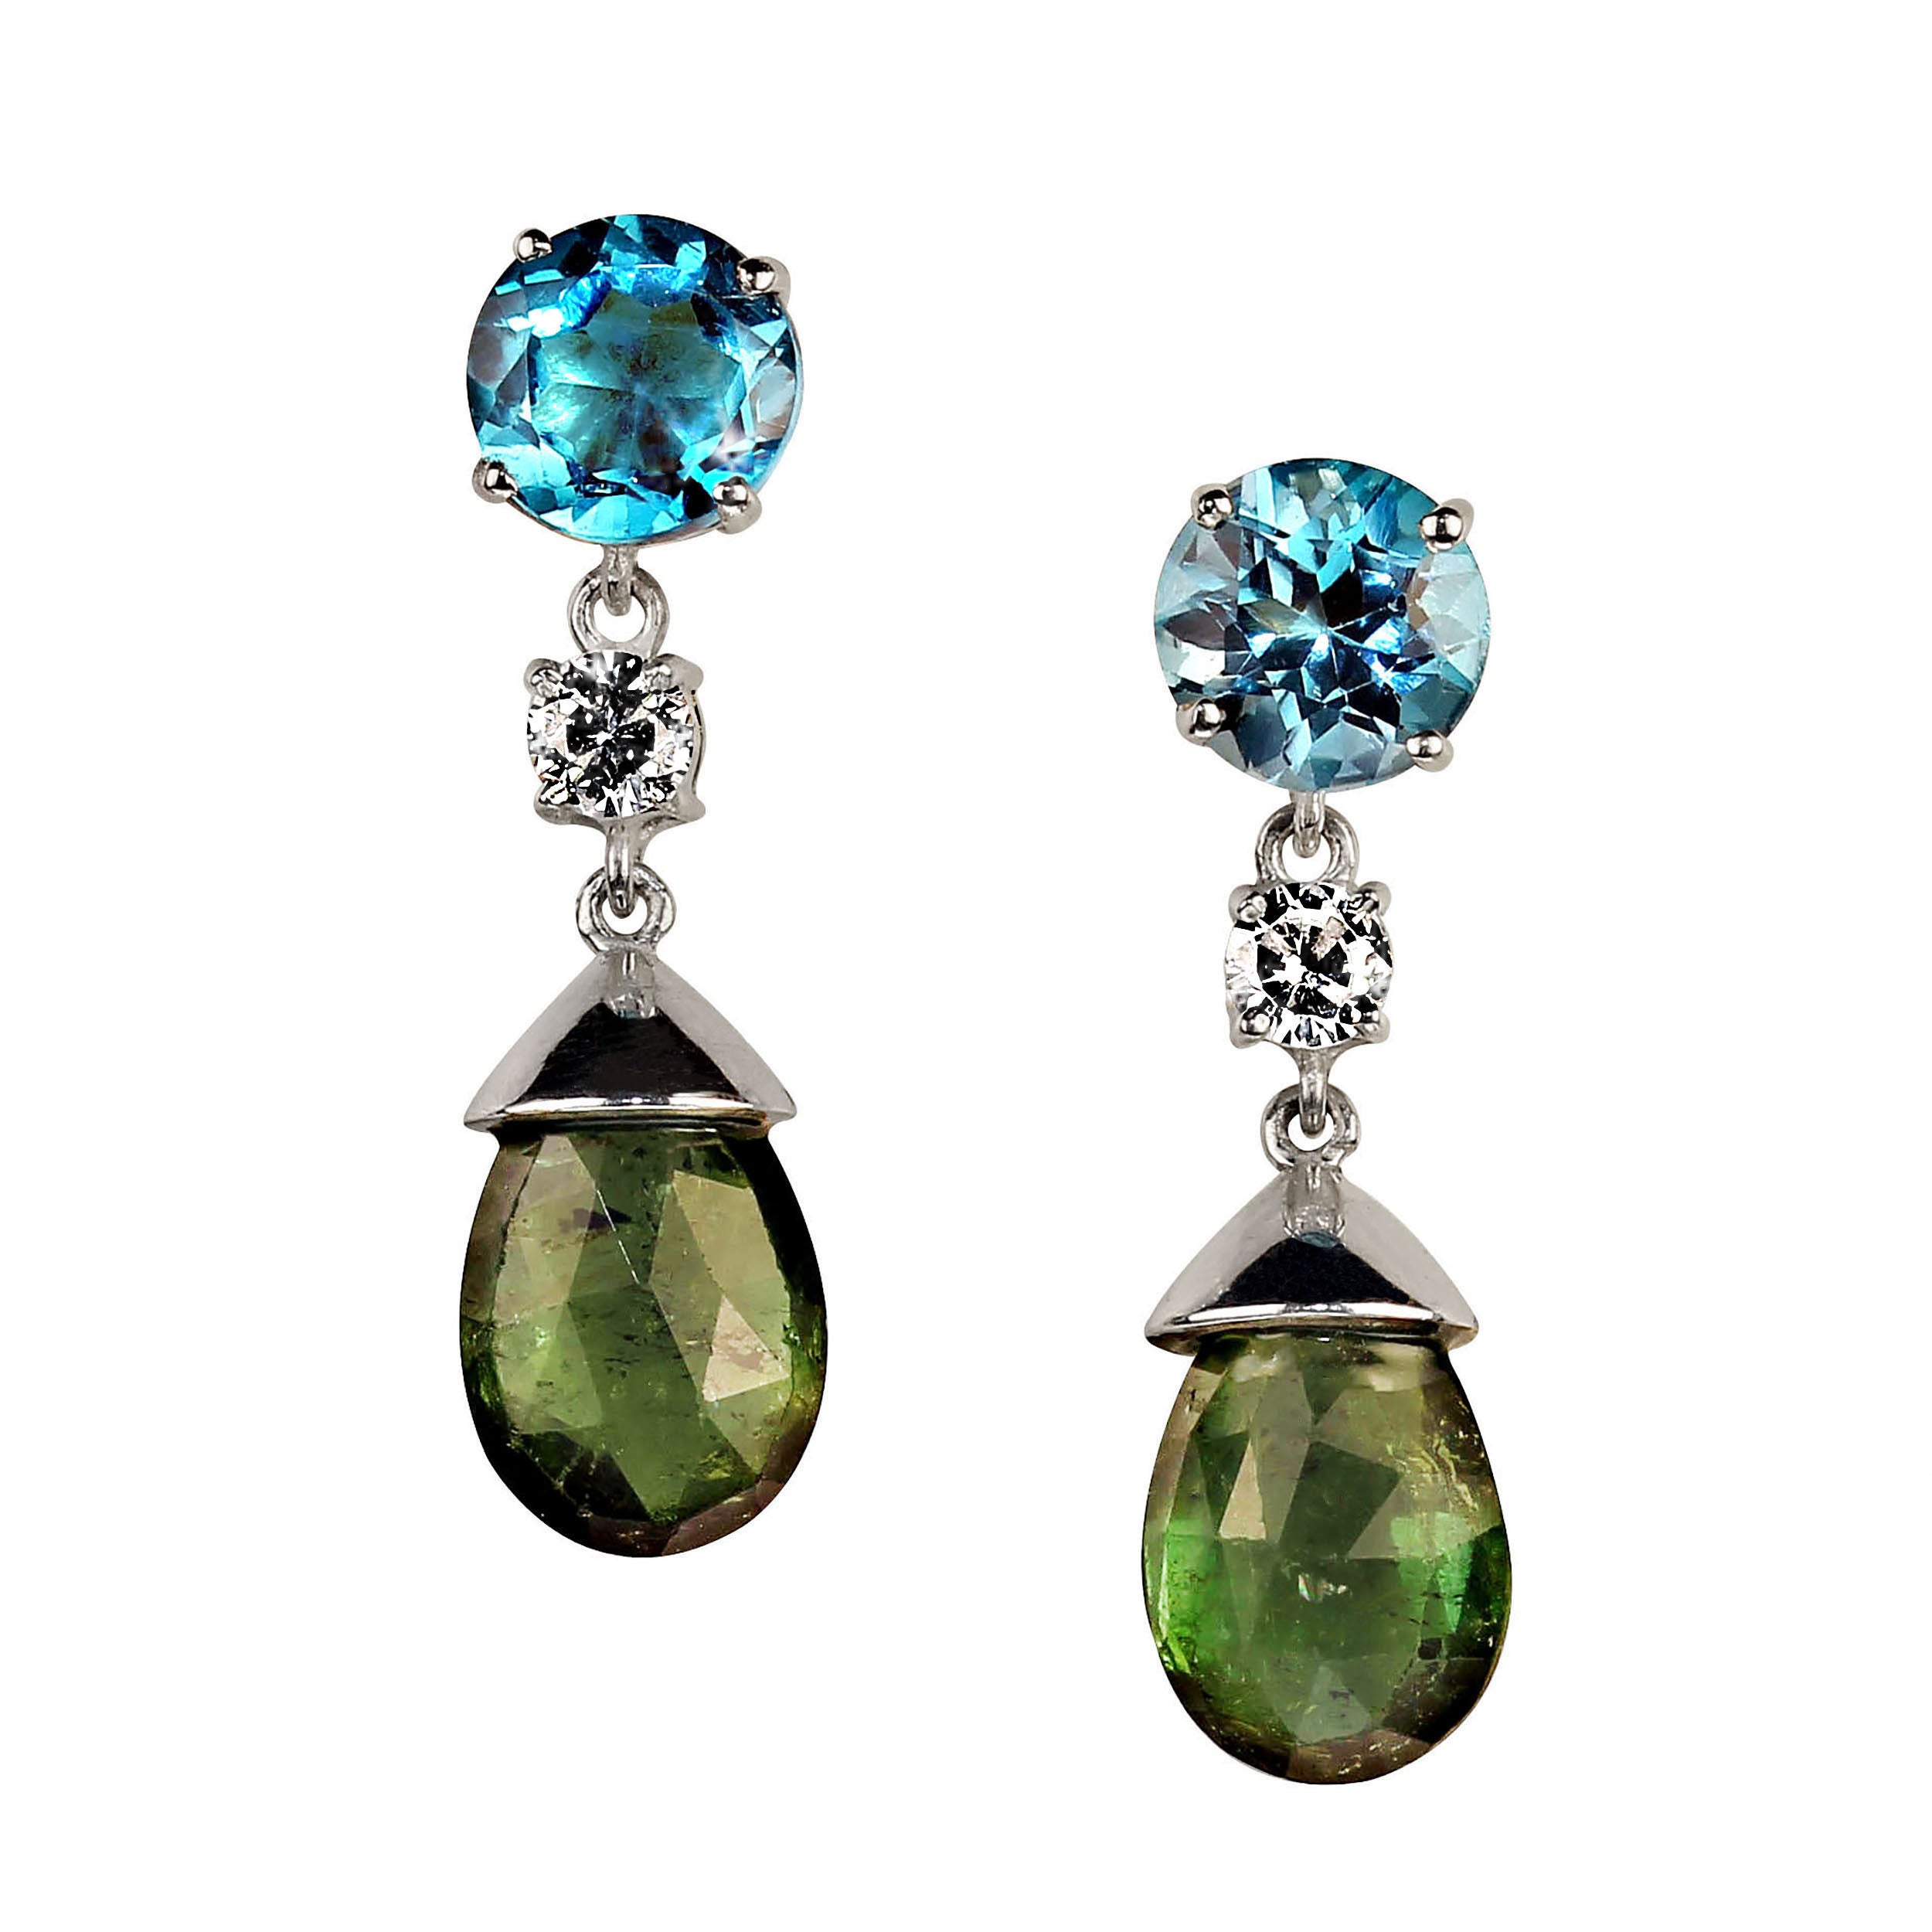 AJD Dangle Delight Earrings in Apatite and Green Tourmaline For Sale